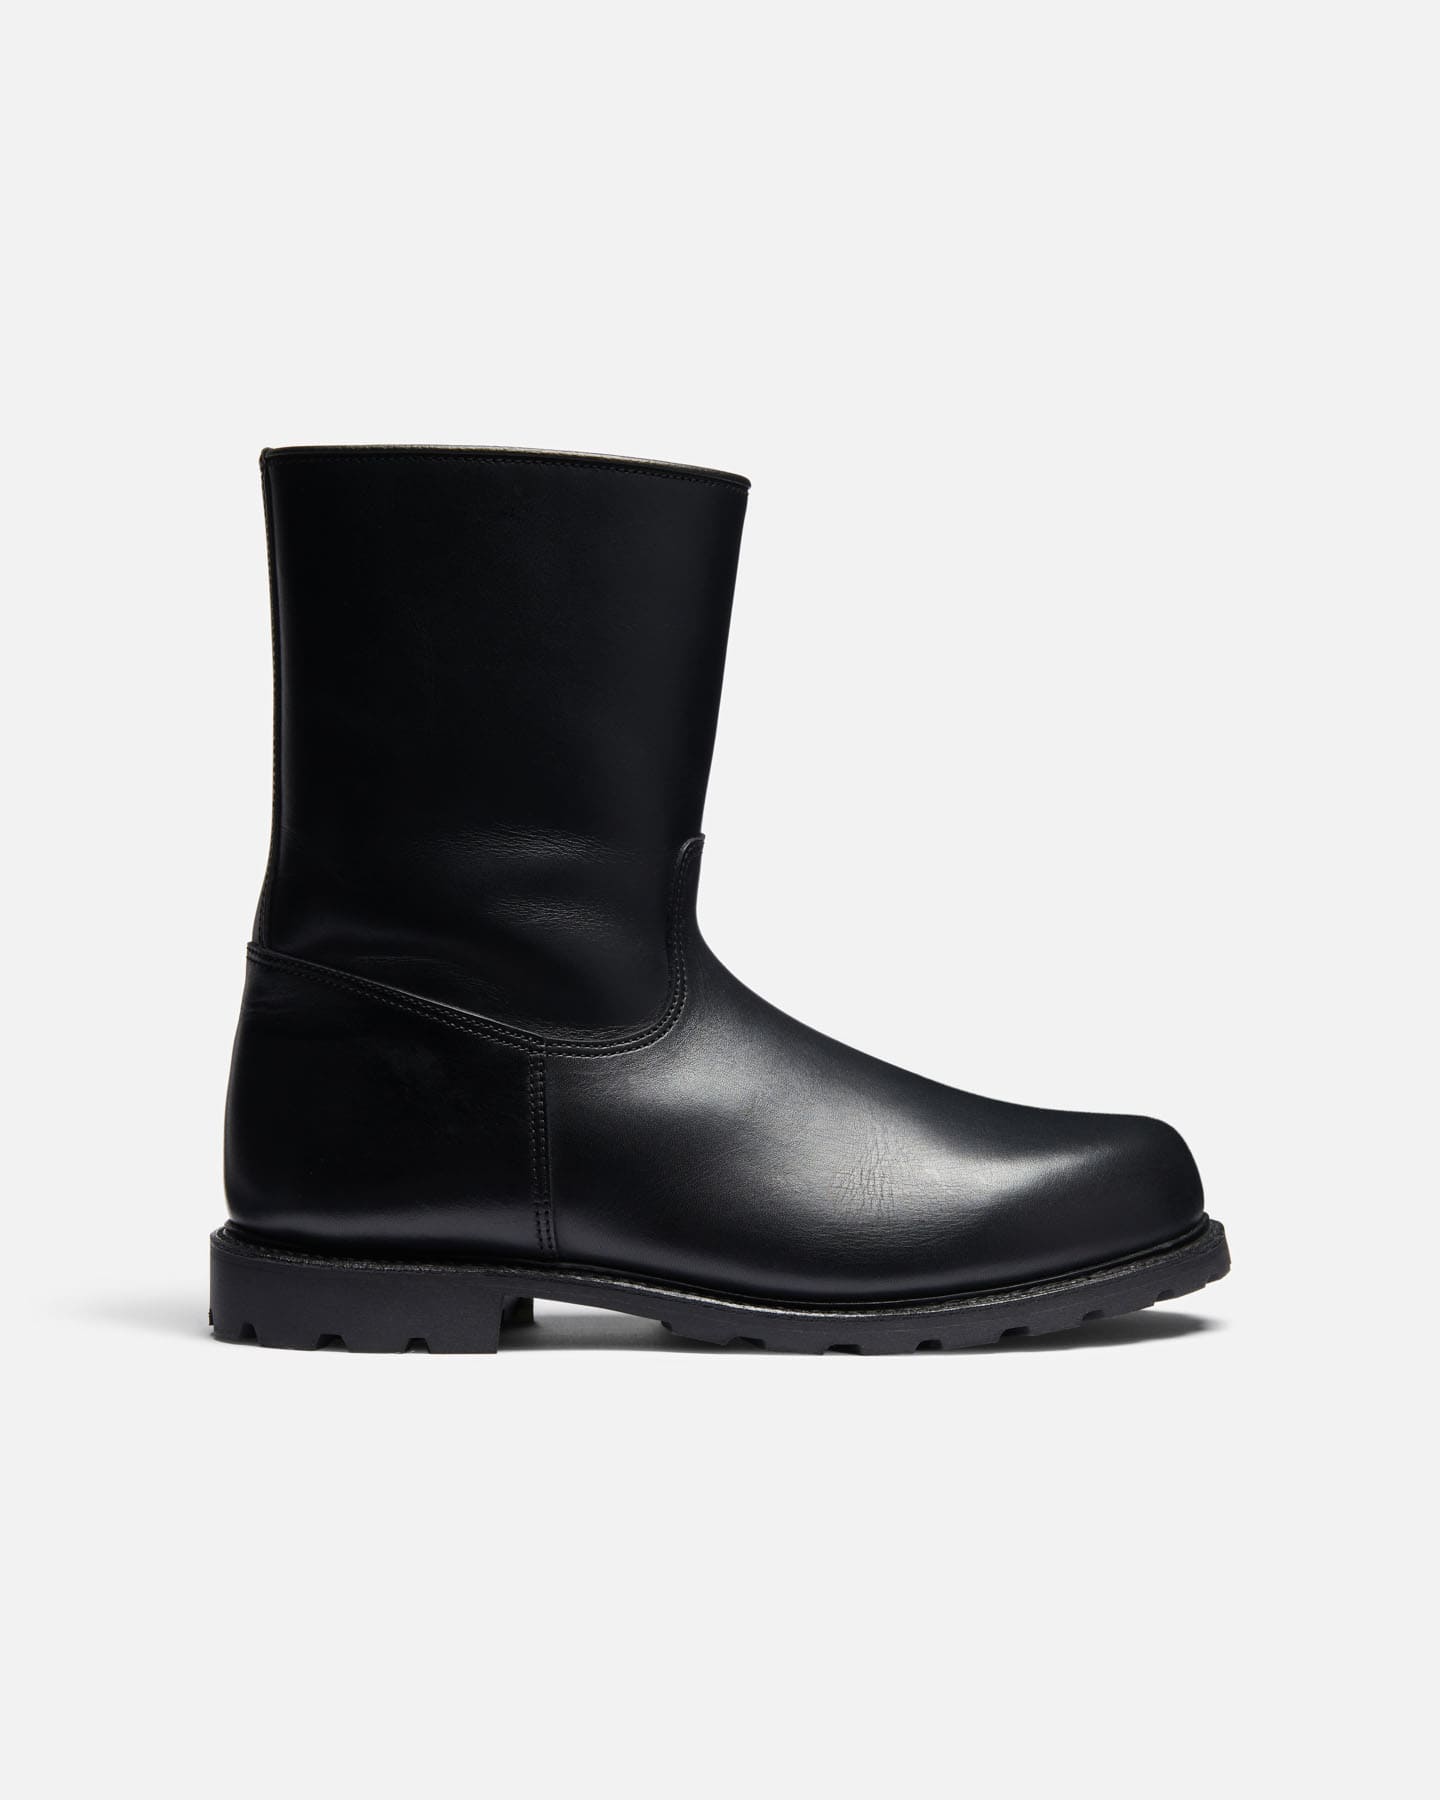 Field boots black with shearling lining_02